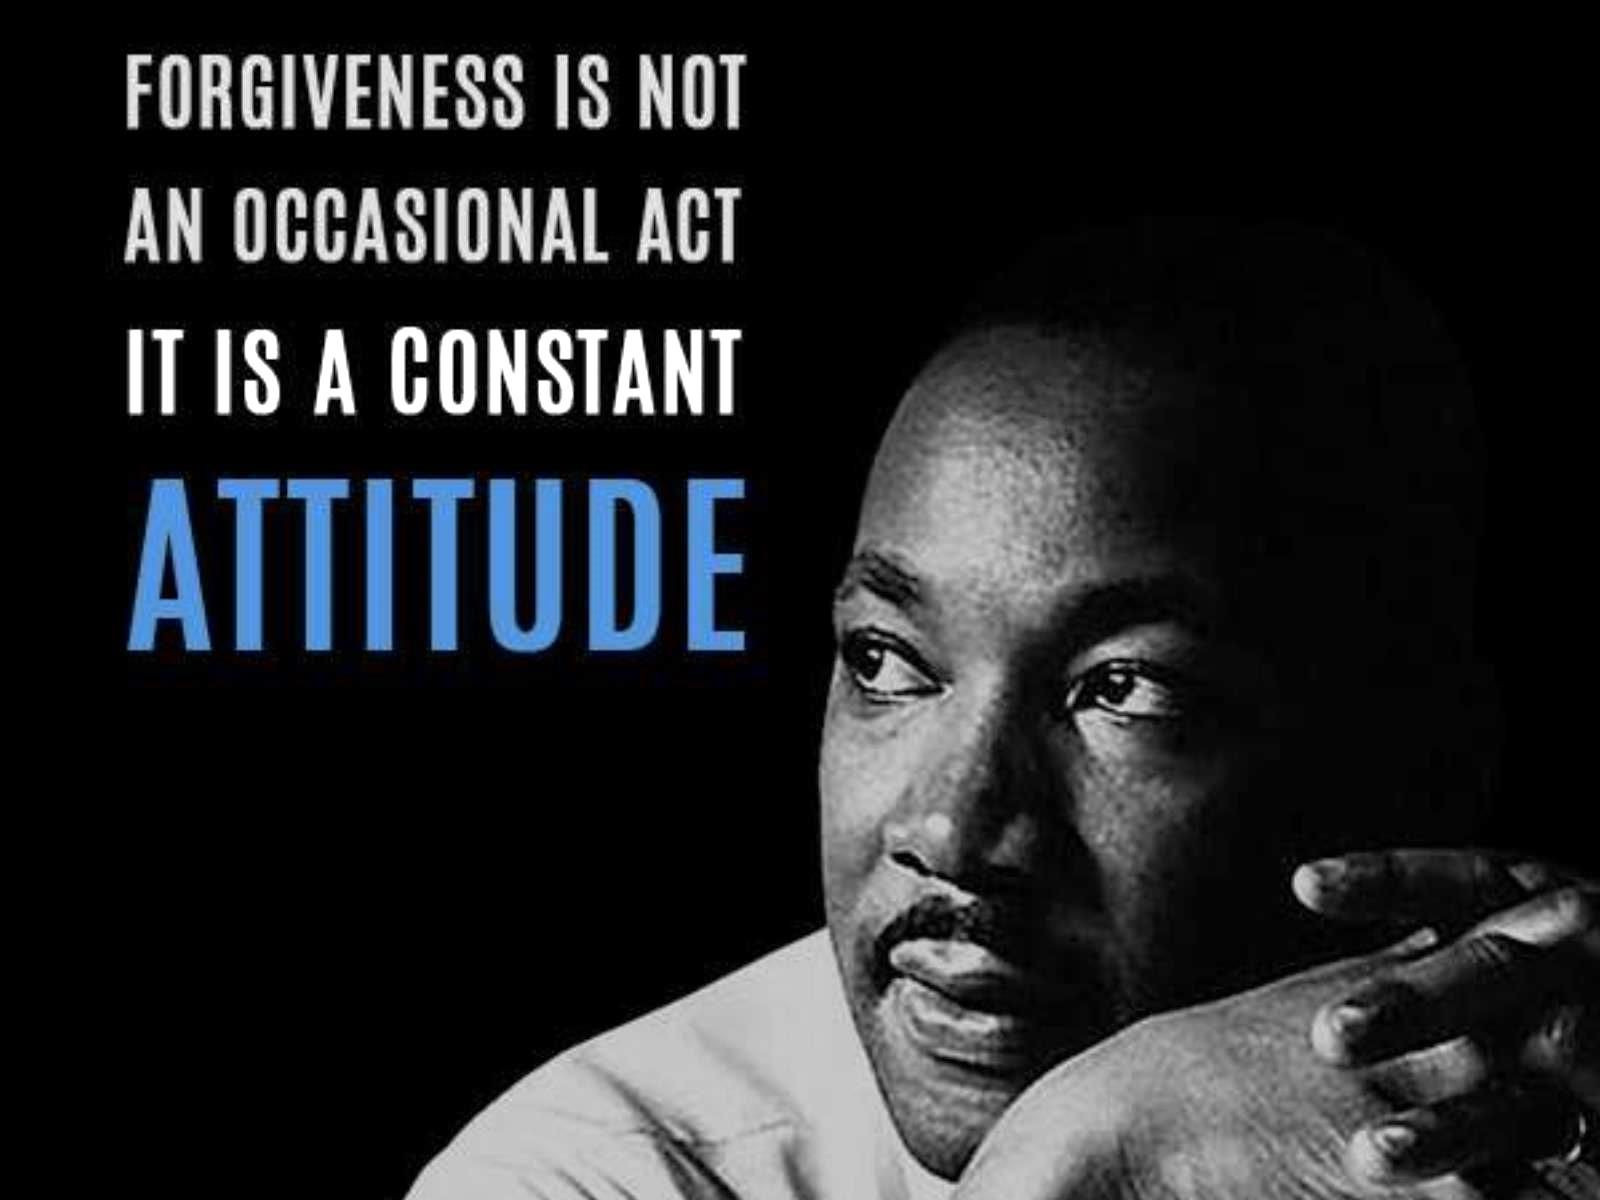 Martin Luther King Jr Quotes Education
 mlk quote education Google Search